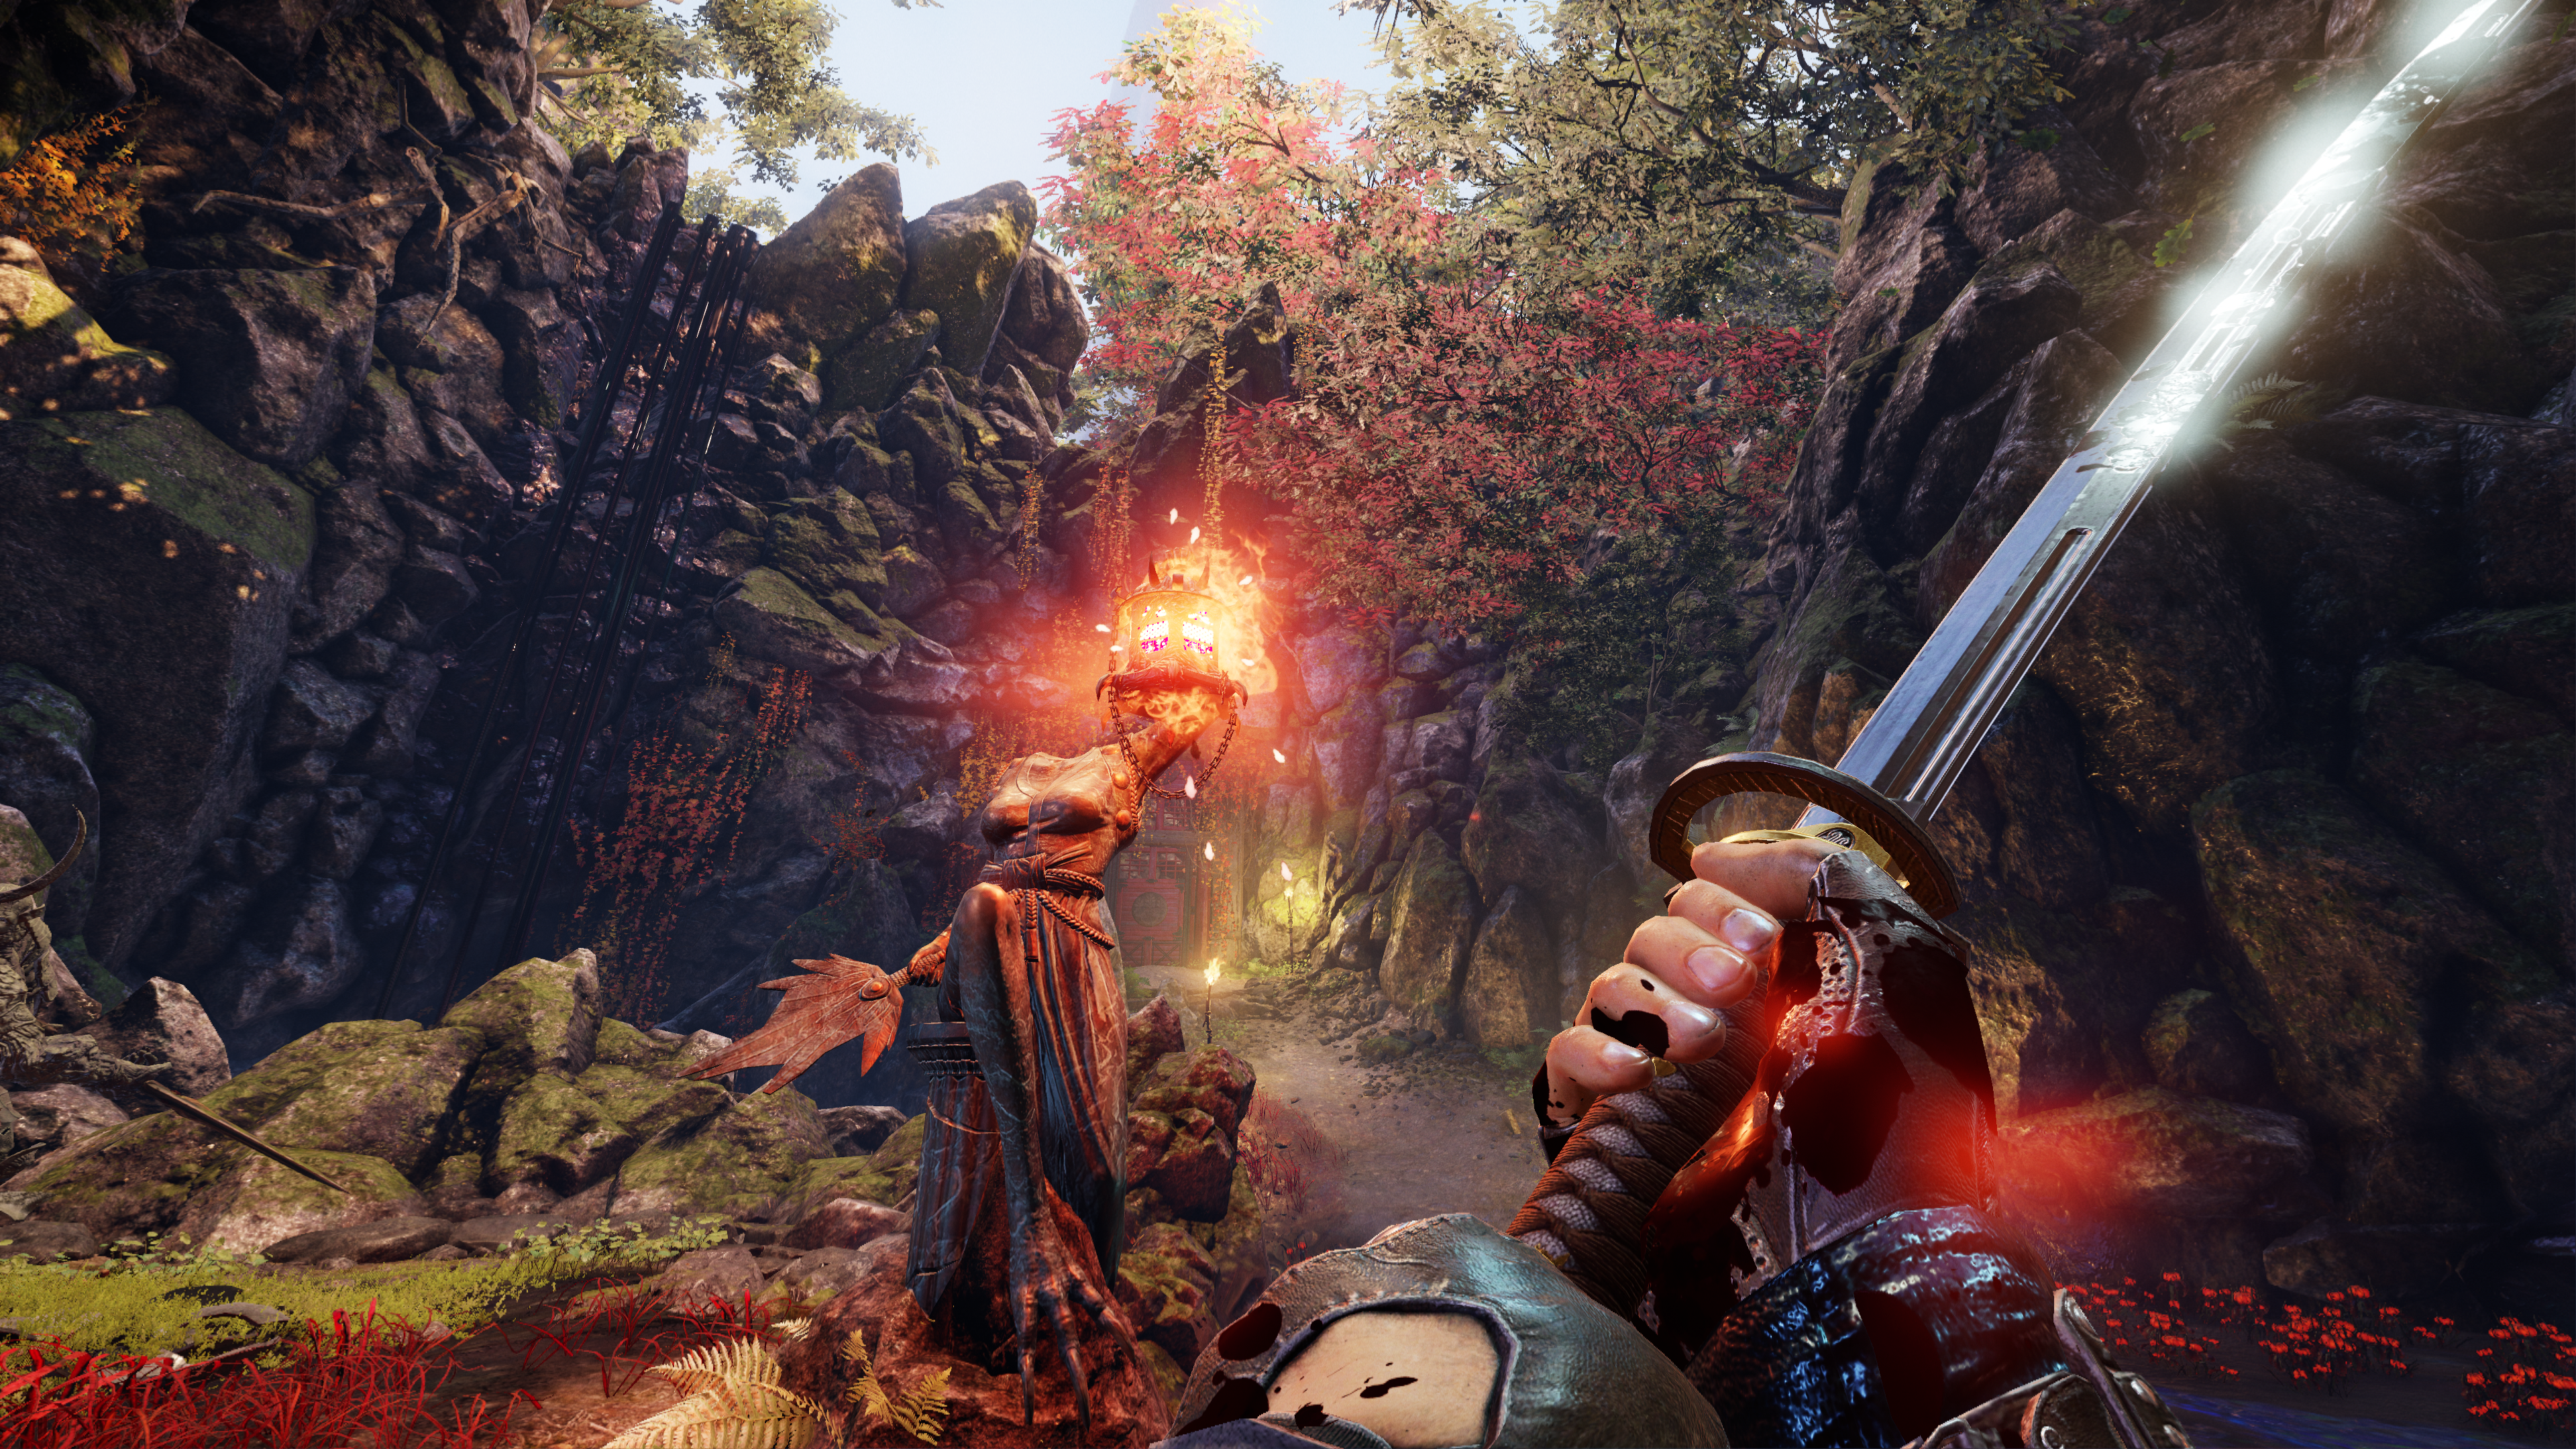 Shadow Warrior 2 Available Now, Includes NVIDIA Multi-Res Shading For 30%  Faster Performance